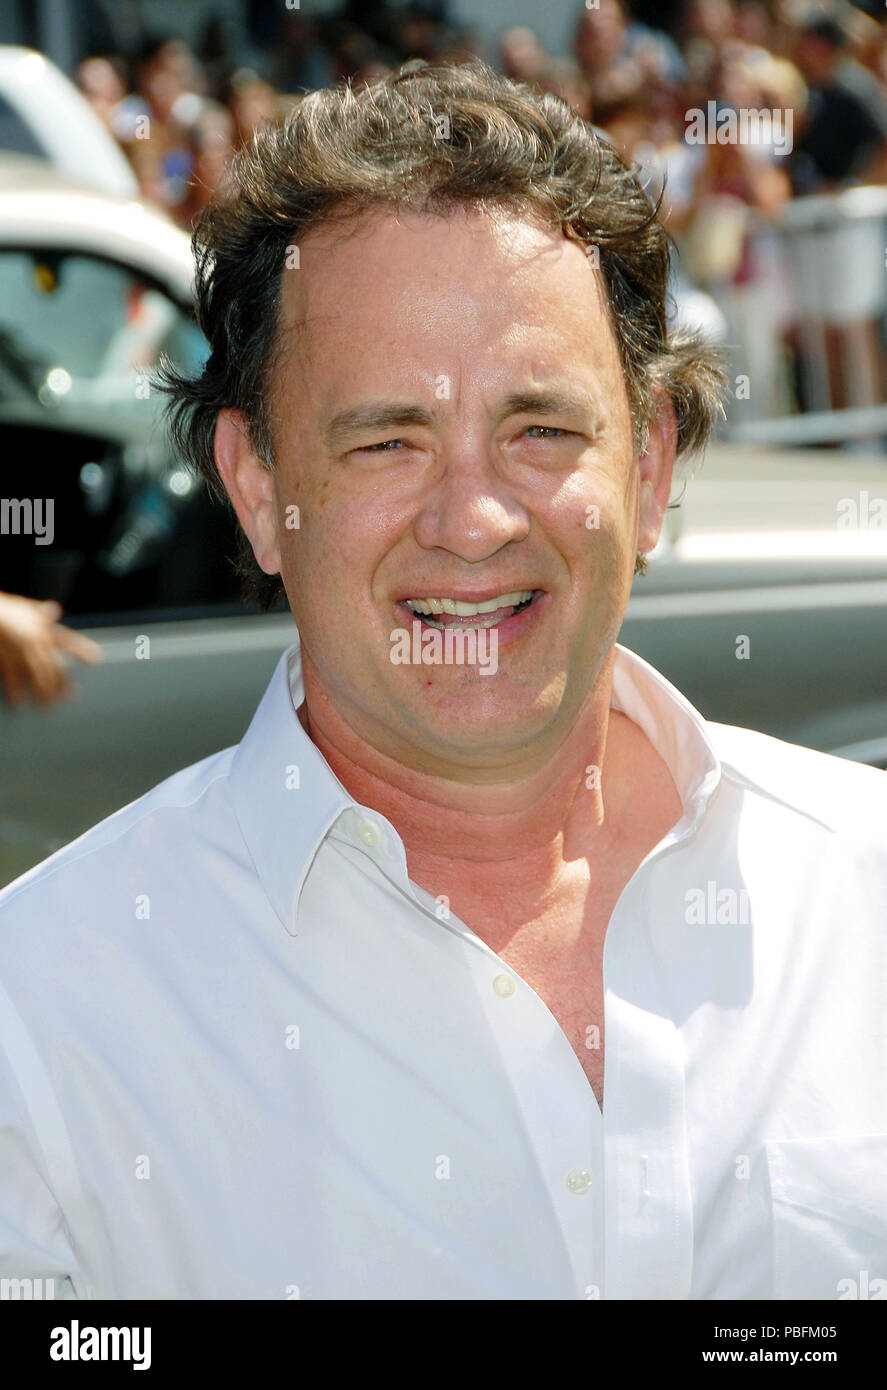 Tom Hanks arriving at the ANT BULLY Premiere at the Chinese Theatre In Los  Angeles. July 23, 2006. eye contact headshot smile01 HanksTom013 Red Carpet  Event, Vertical, USA, Film Industry, Celebrities, Photography,